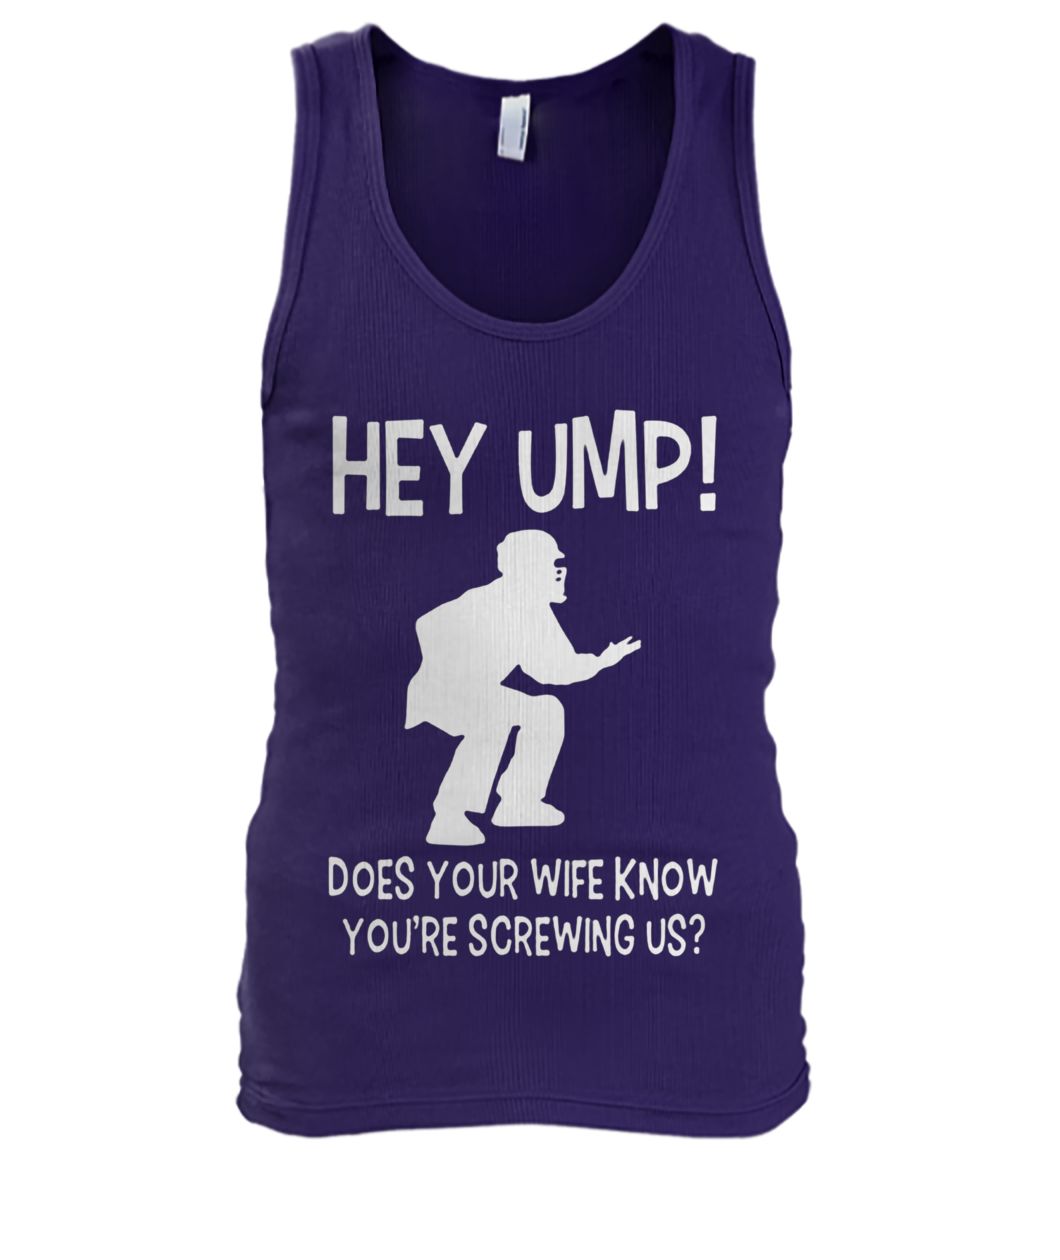 Hey ump does your wife know you're screwing us men's tank top